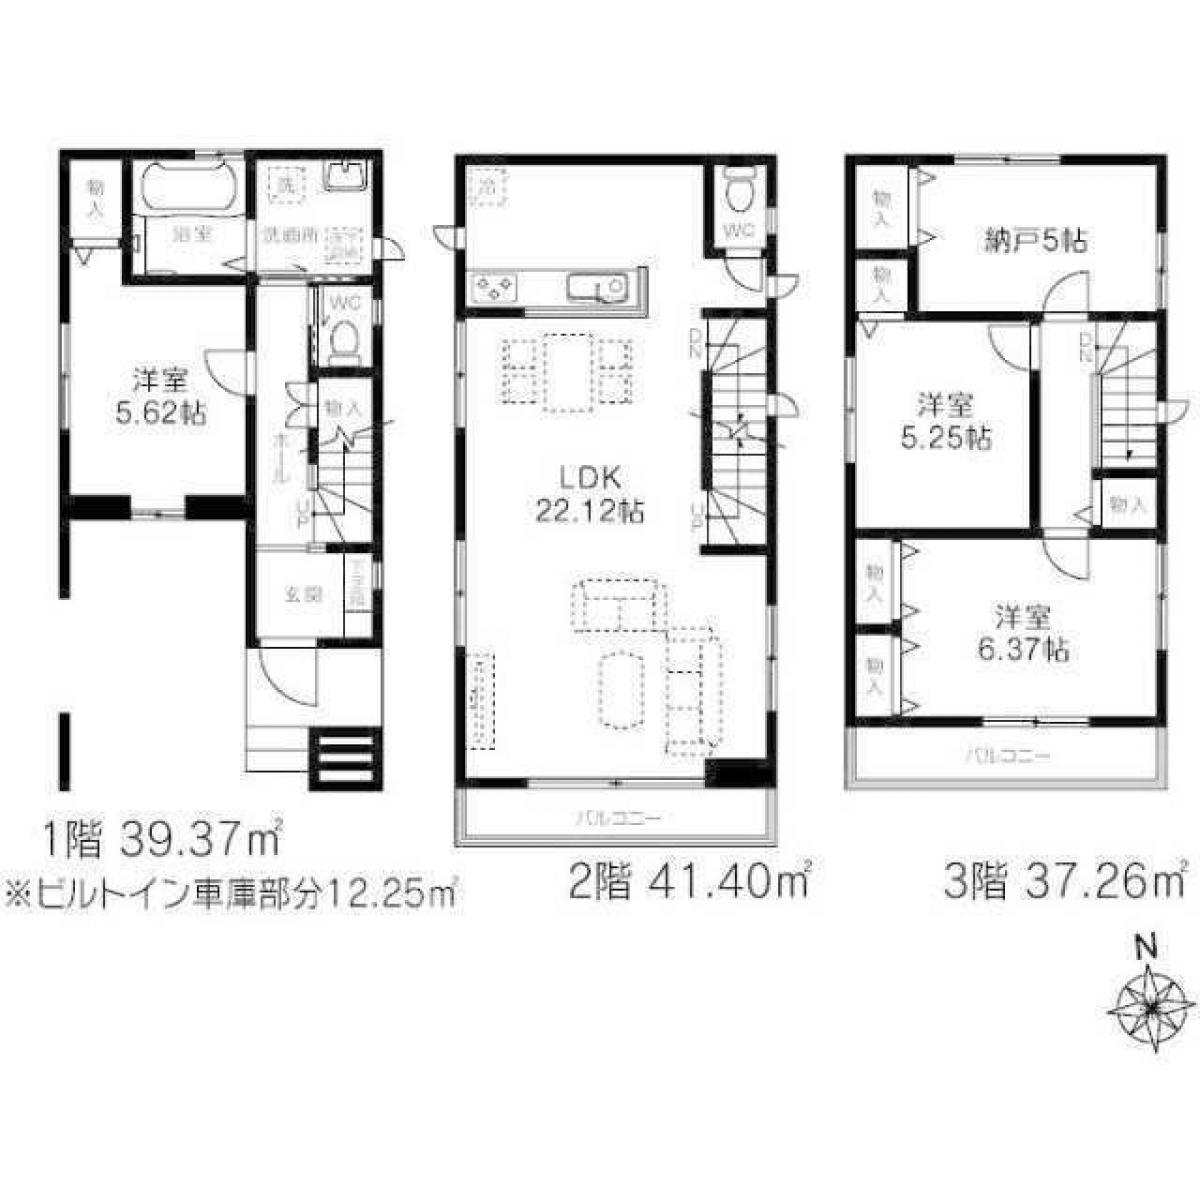 Picture of Home For Sale in Sumida Ku, Tokyo, Japan